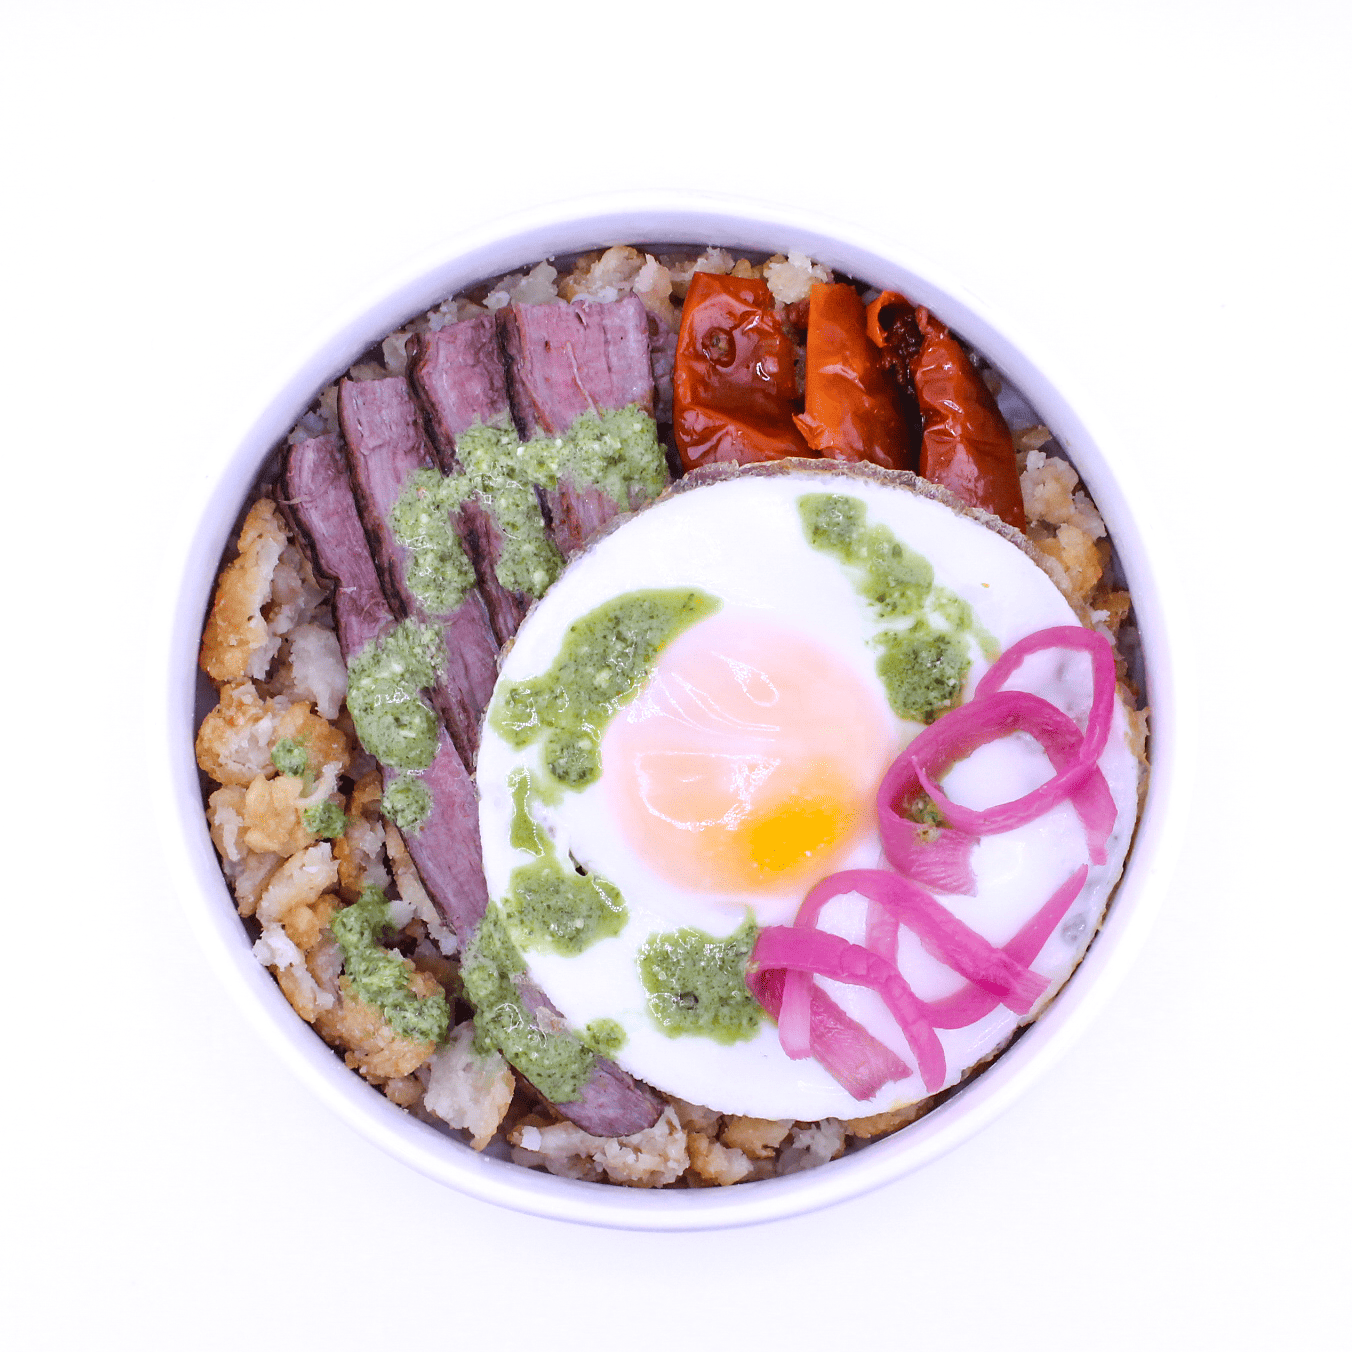 Lumberjack Bowl - Grilled flank steak, crispy potato hash, roasted tomatoes, pickled red onions, green goodness dressing, cage-free egg over easy